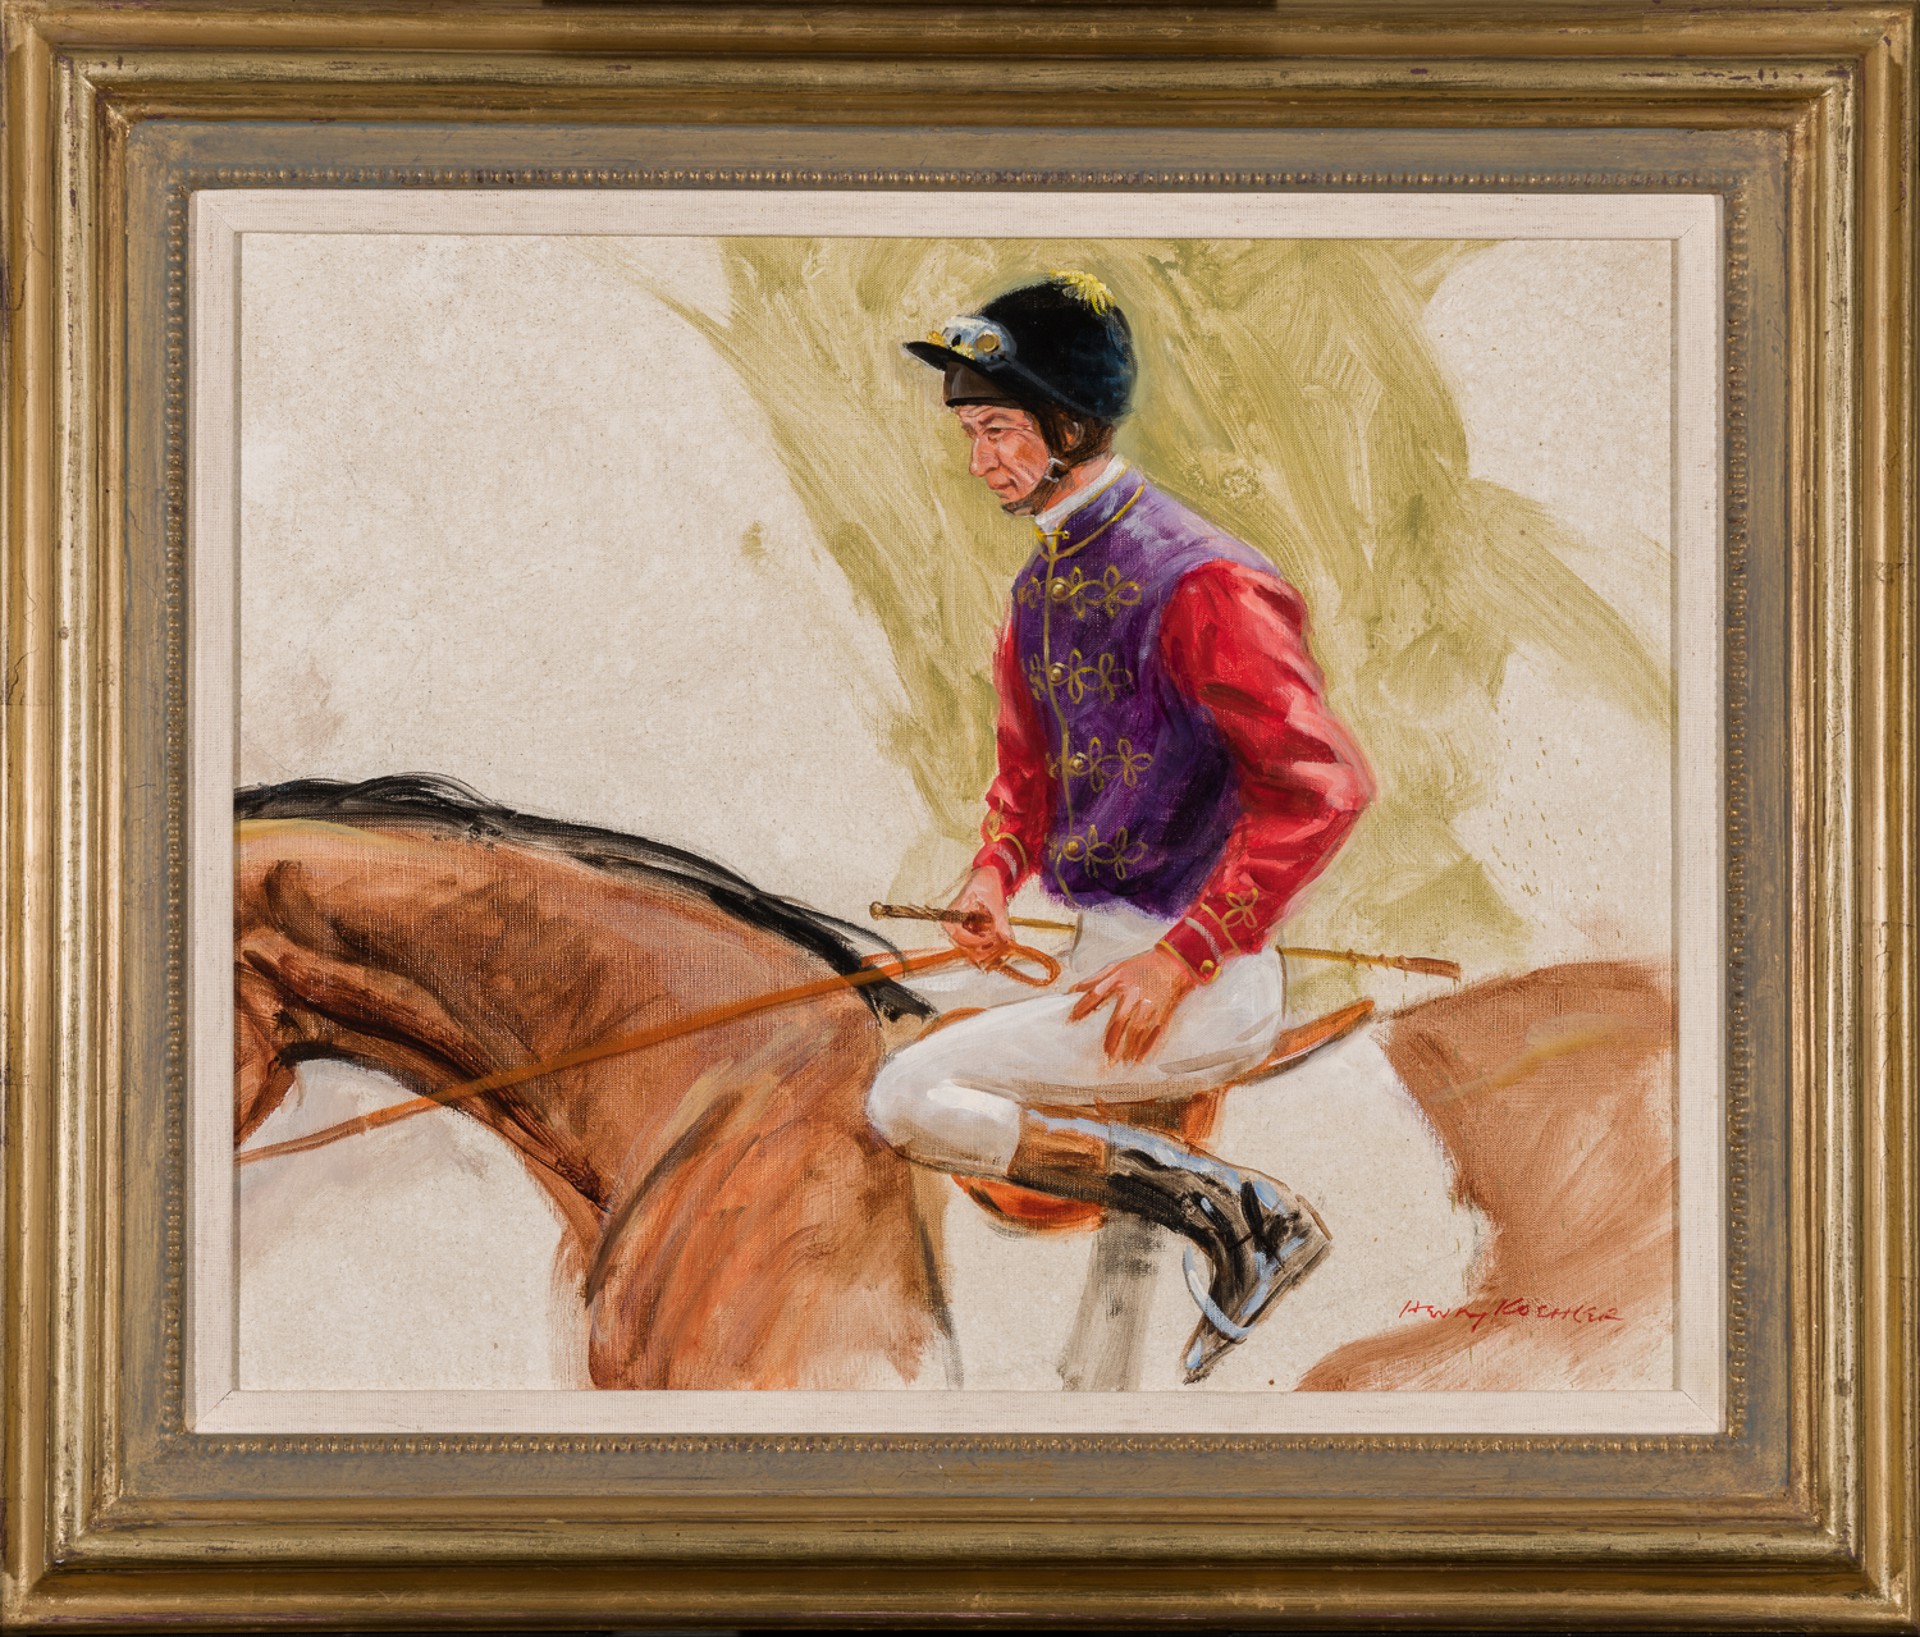 ROYAL COLOURS; LESTER PIGGOTT IN THE COLOURS OF HM THE QUEEN by Henry Koehler